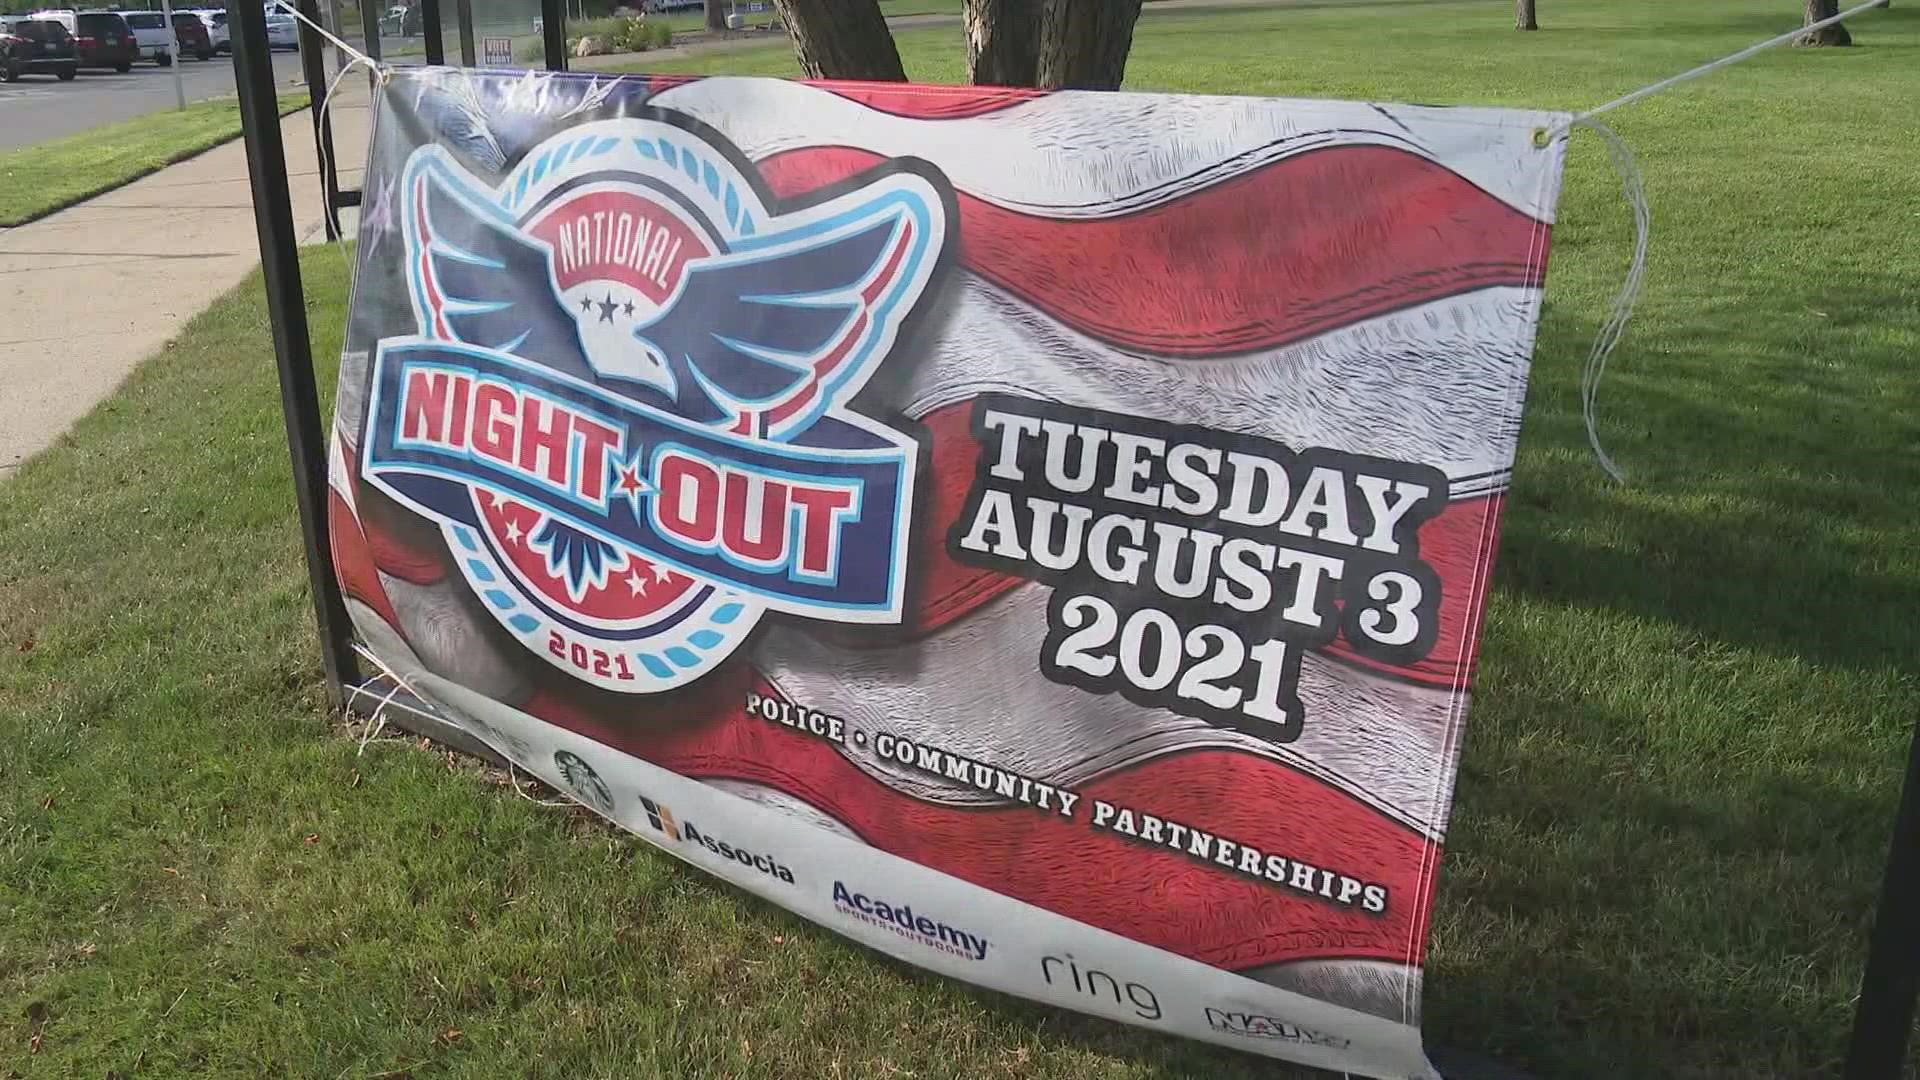 At 7 p.m. Tuesday, everyone in Muskegon is asked to turn on their porch lights to show unity in the fight against crime.